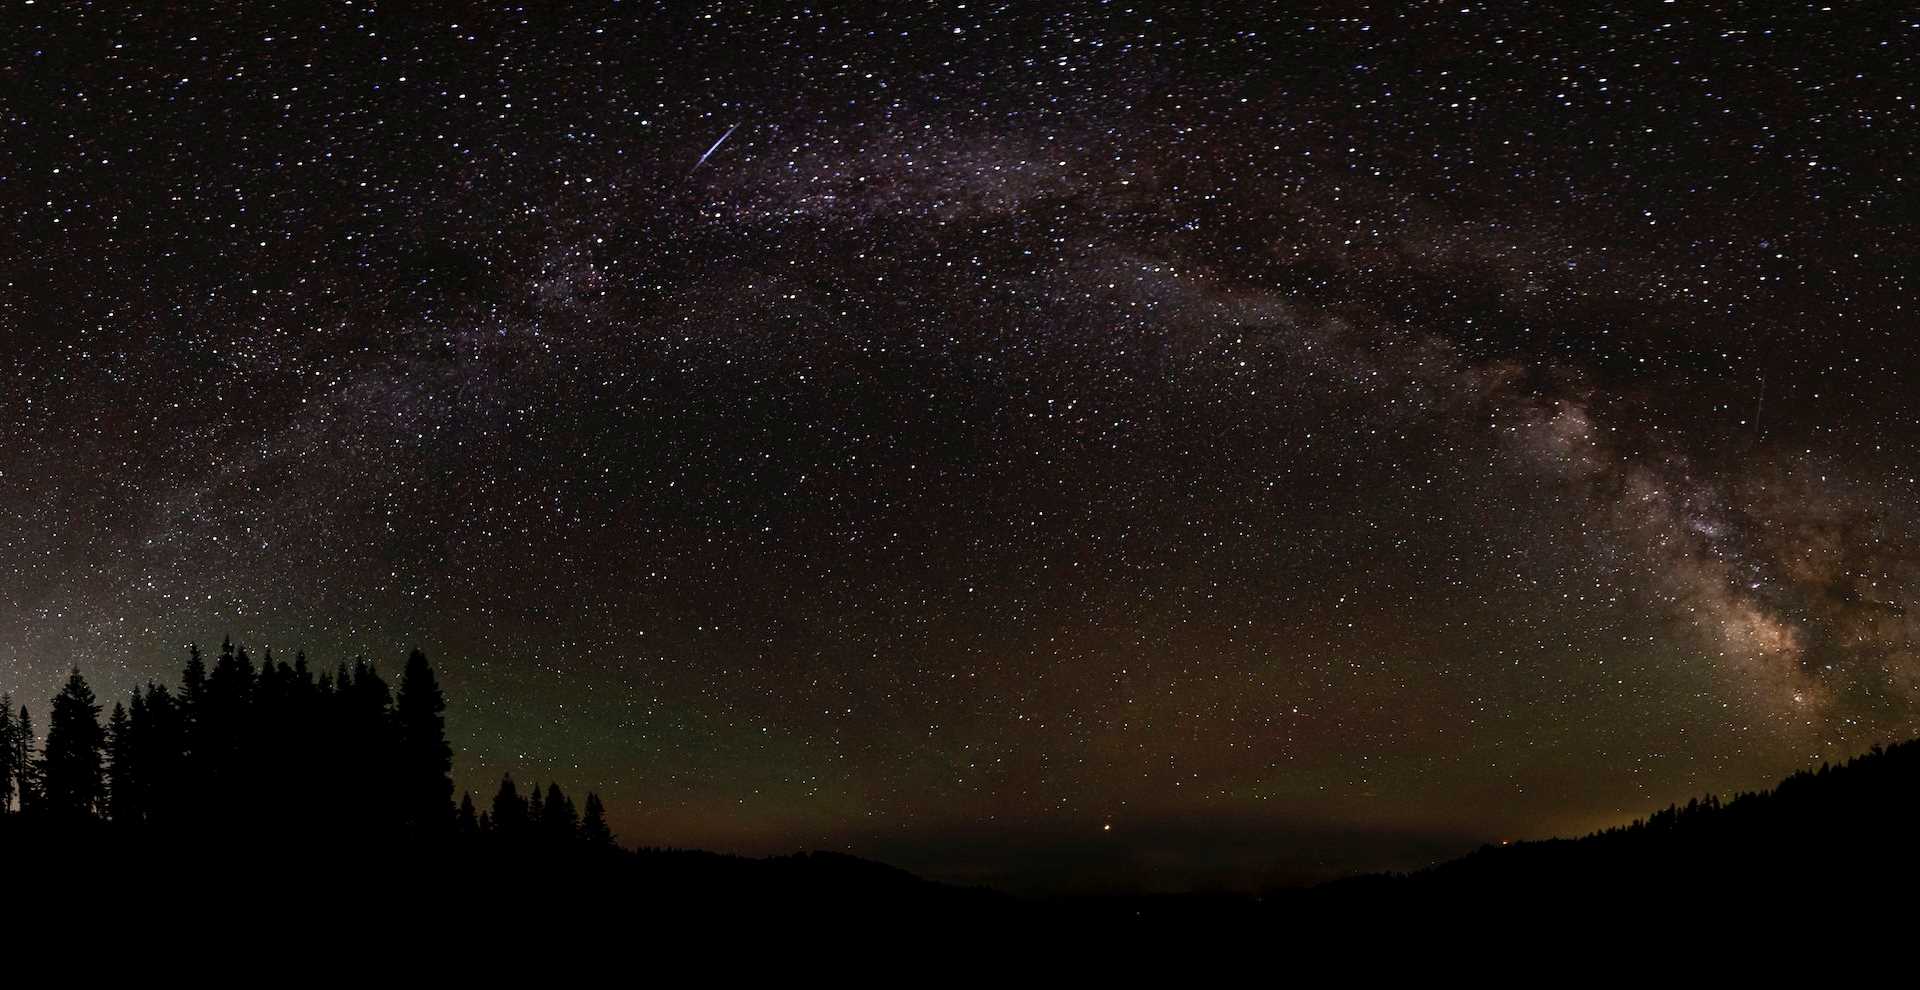 Milky Way panorama with Perseid meteors